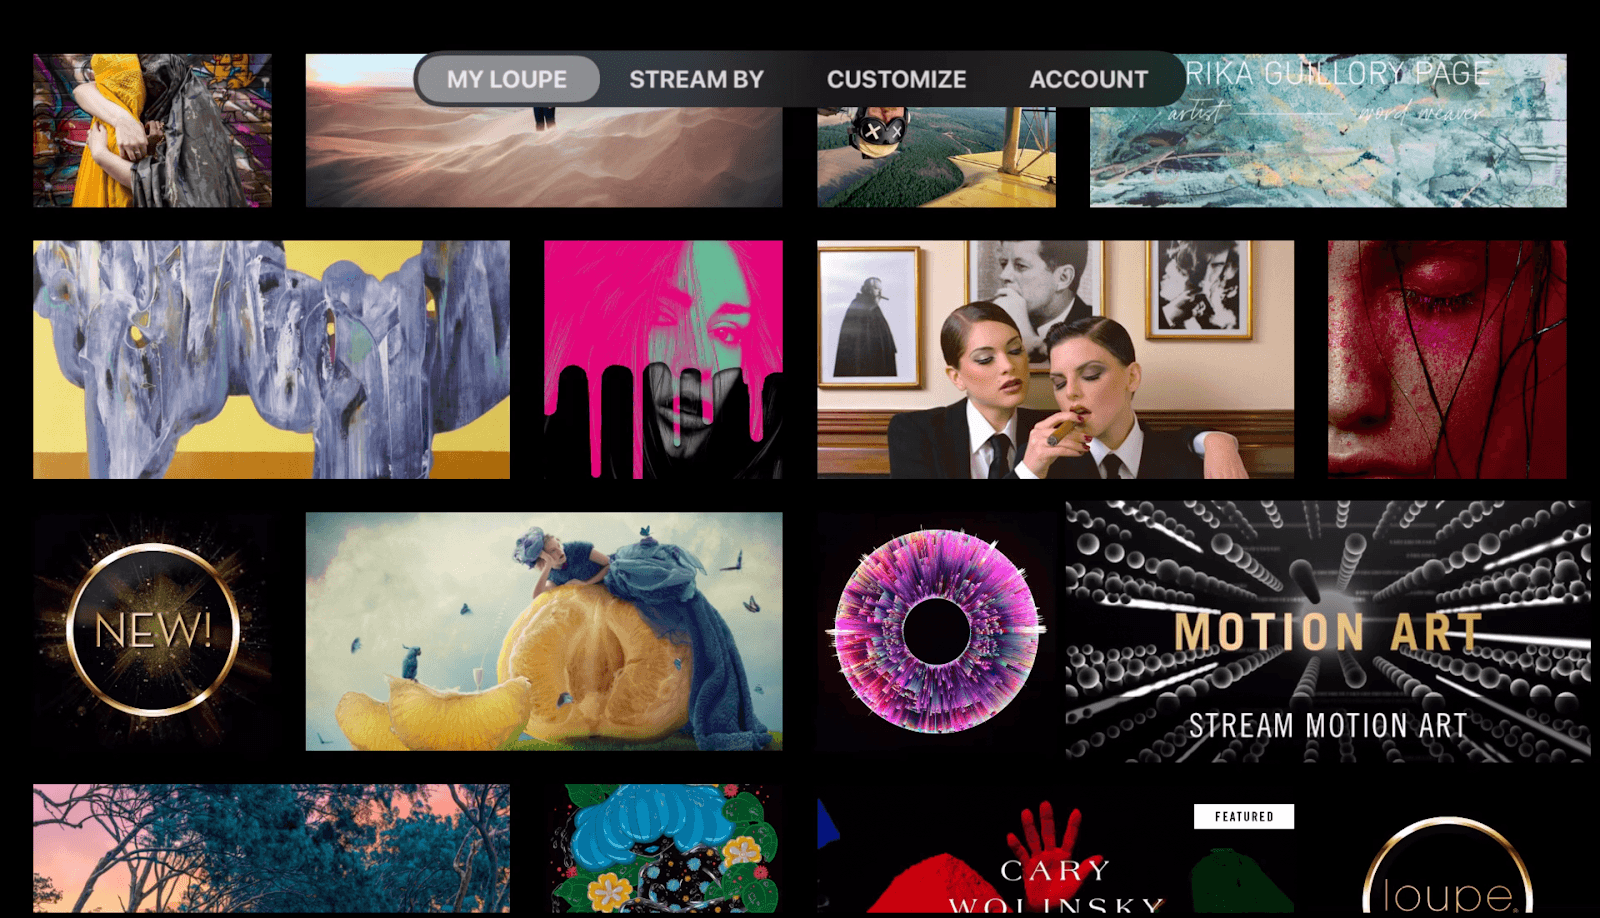 Loupe App Launches a New Motion Art Channel on Apple TV